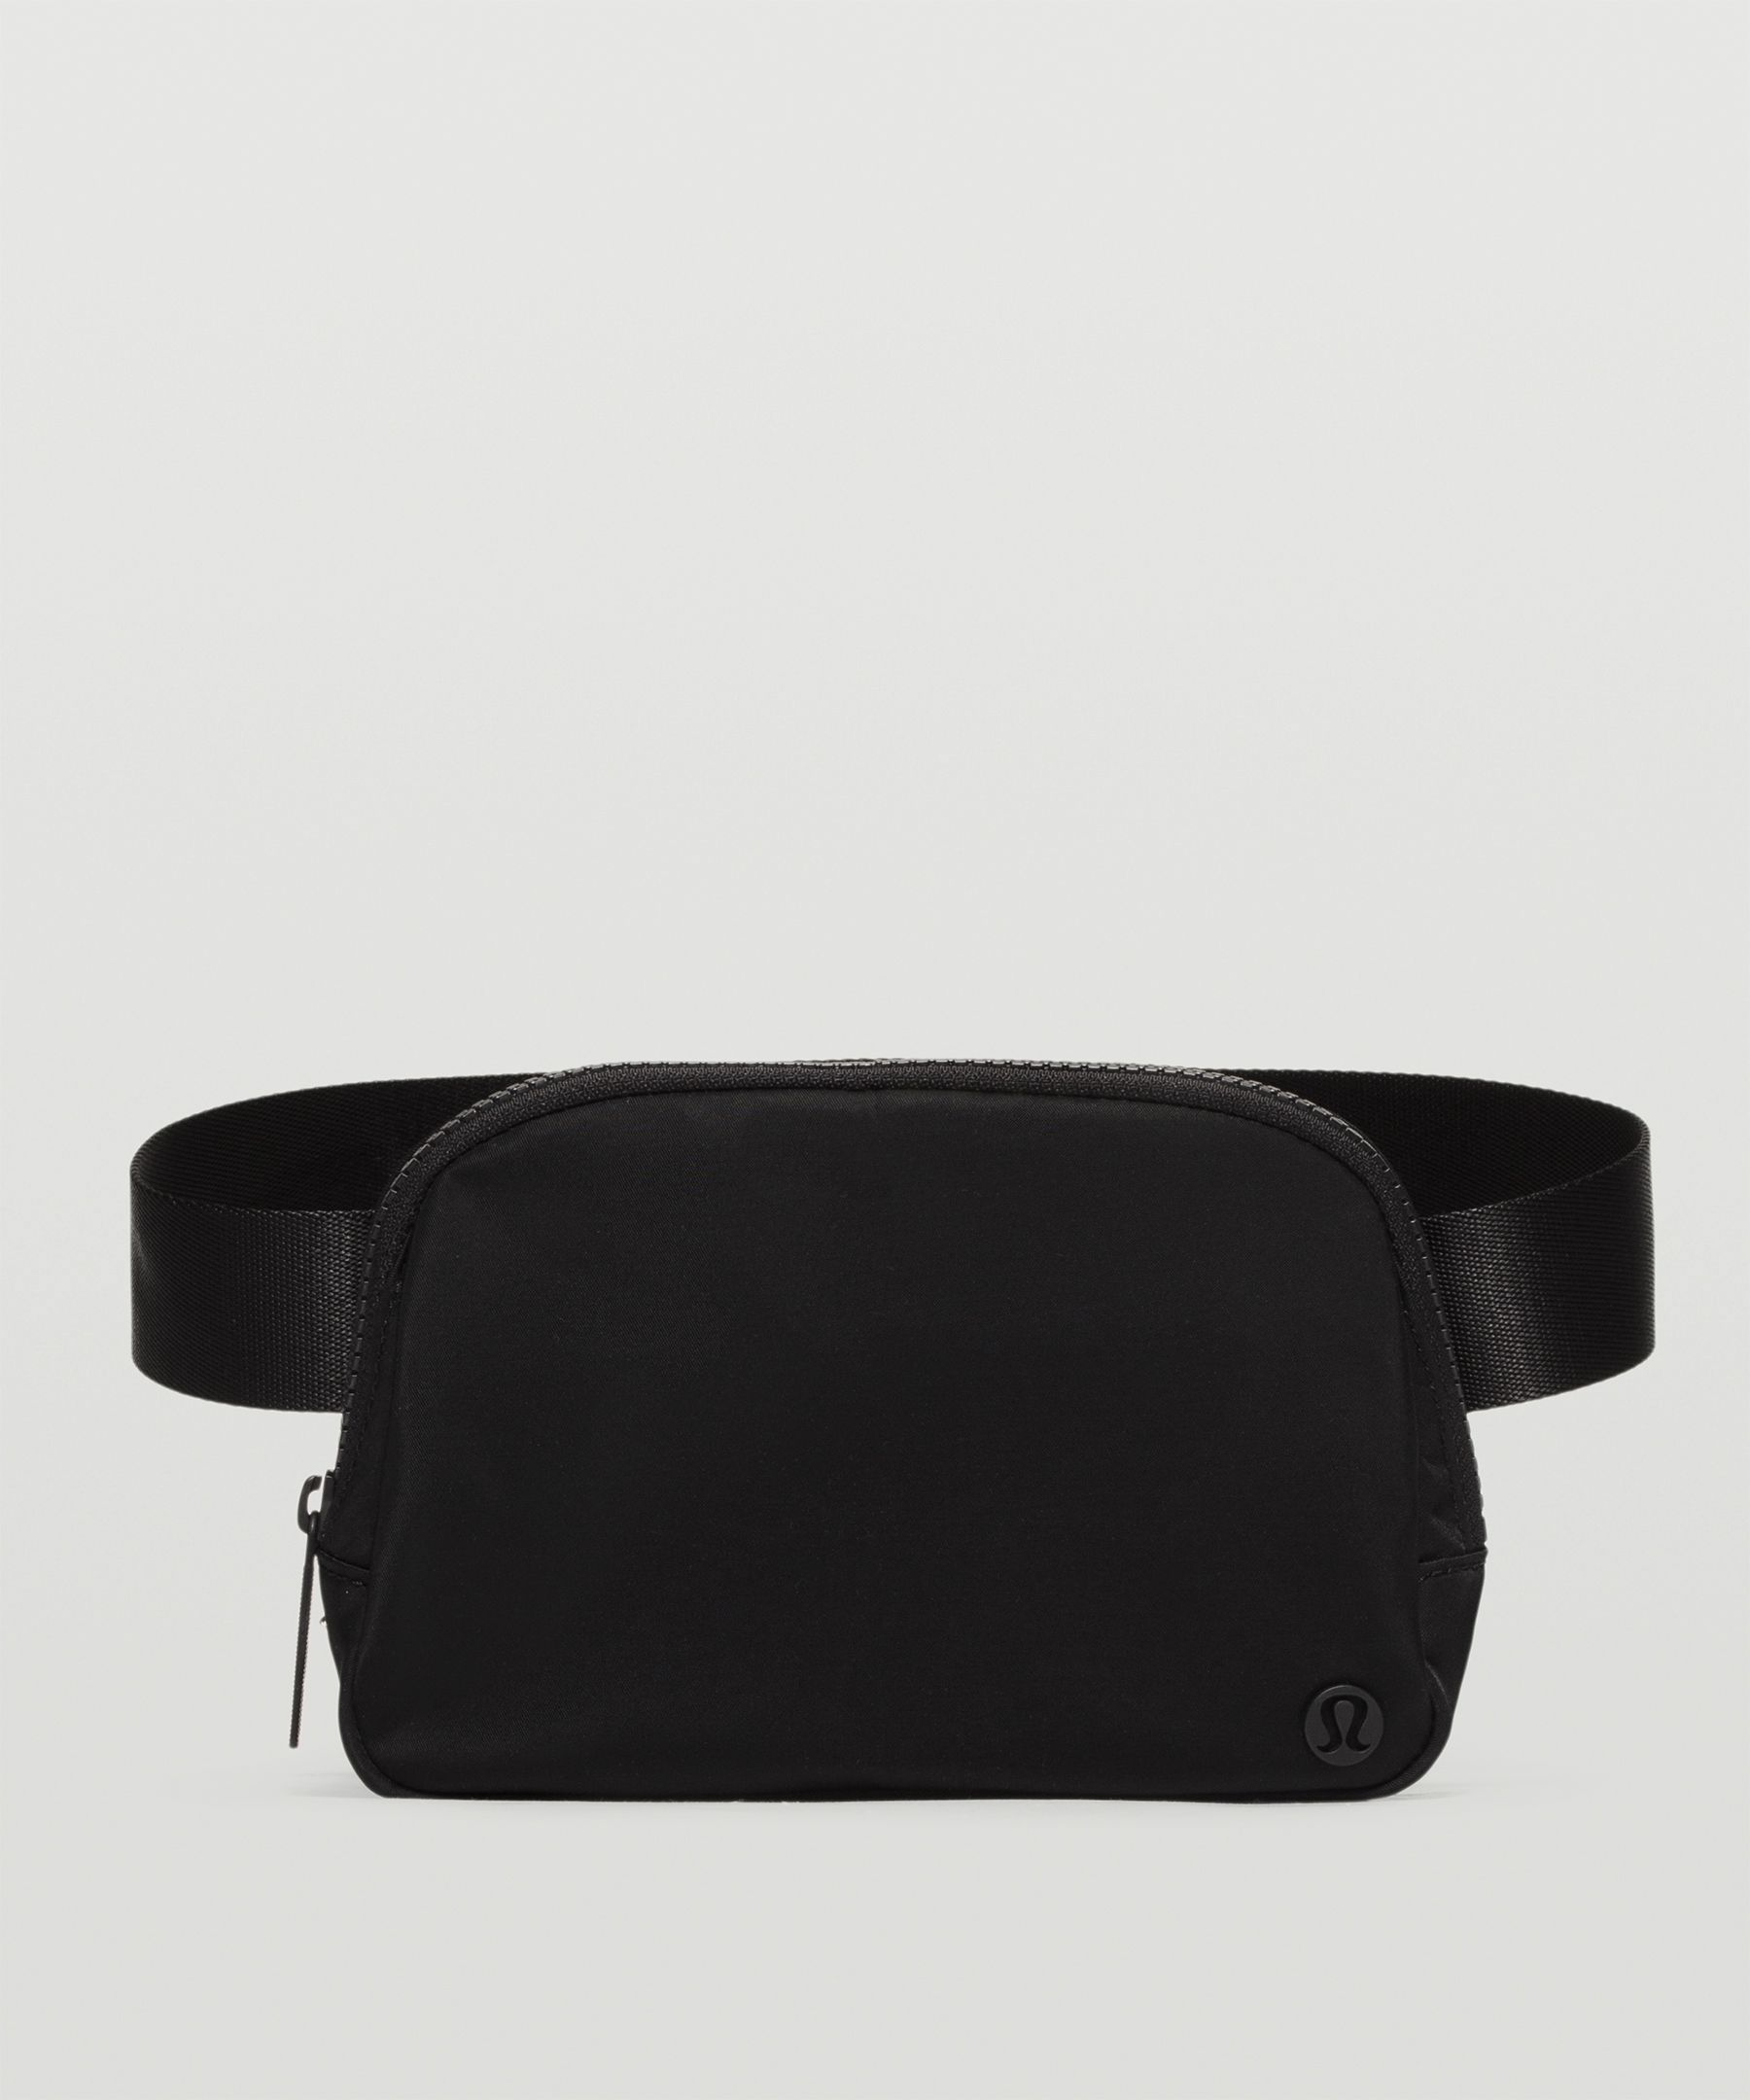 RESTOCK] Like what you see? Shop Ortus Waist Bag now via the link